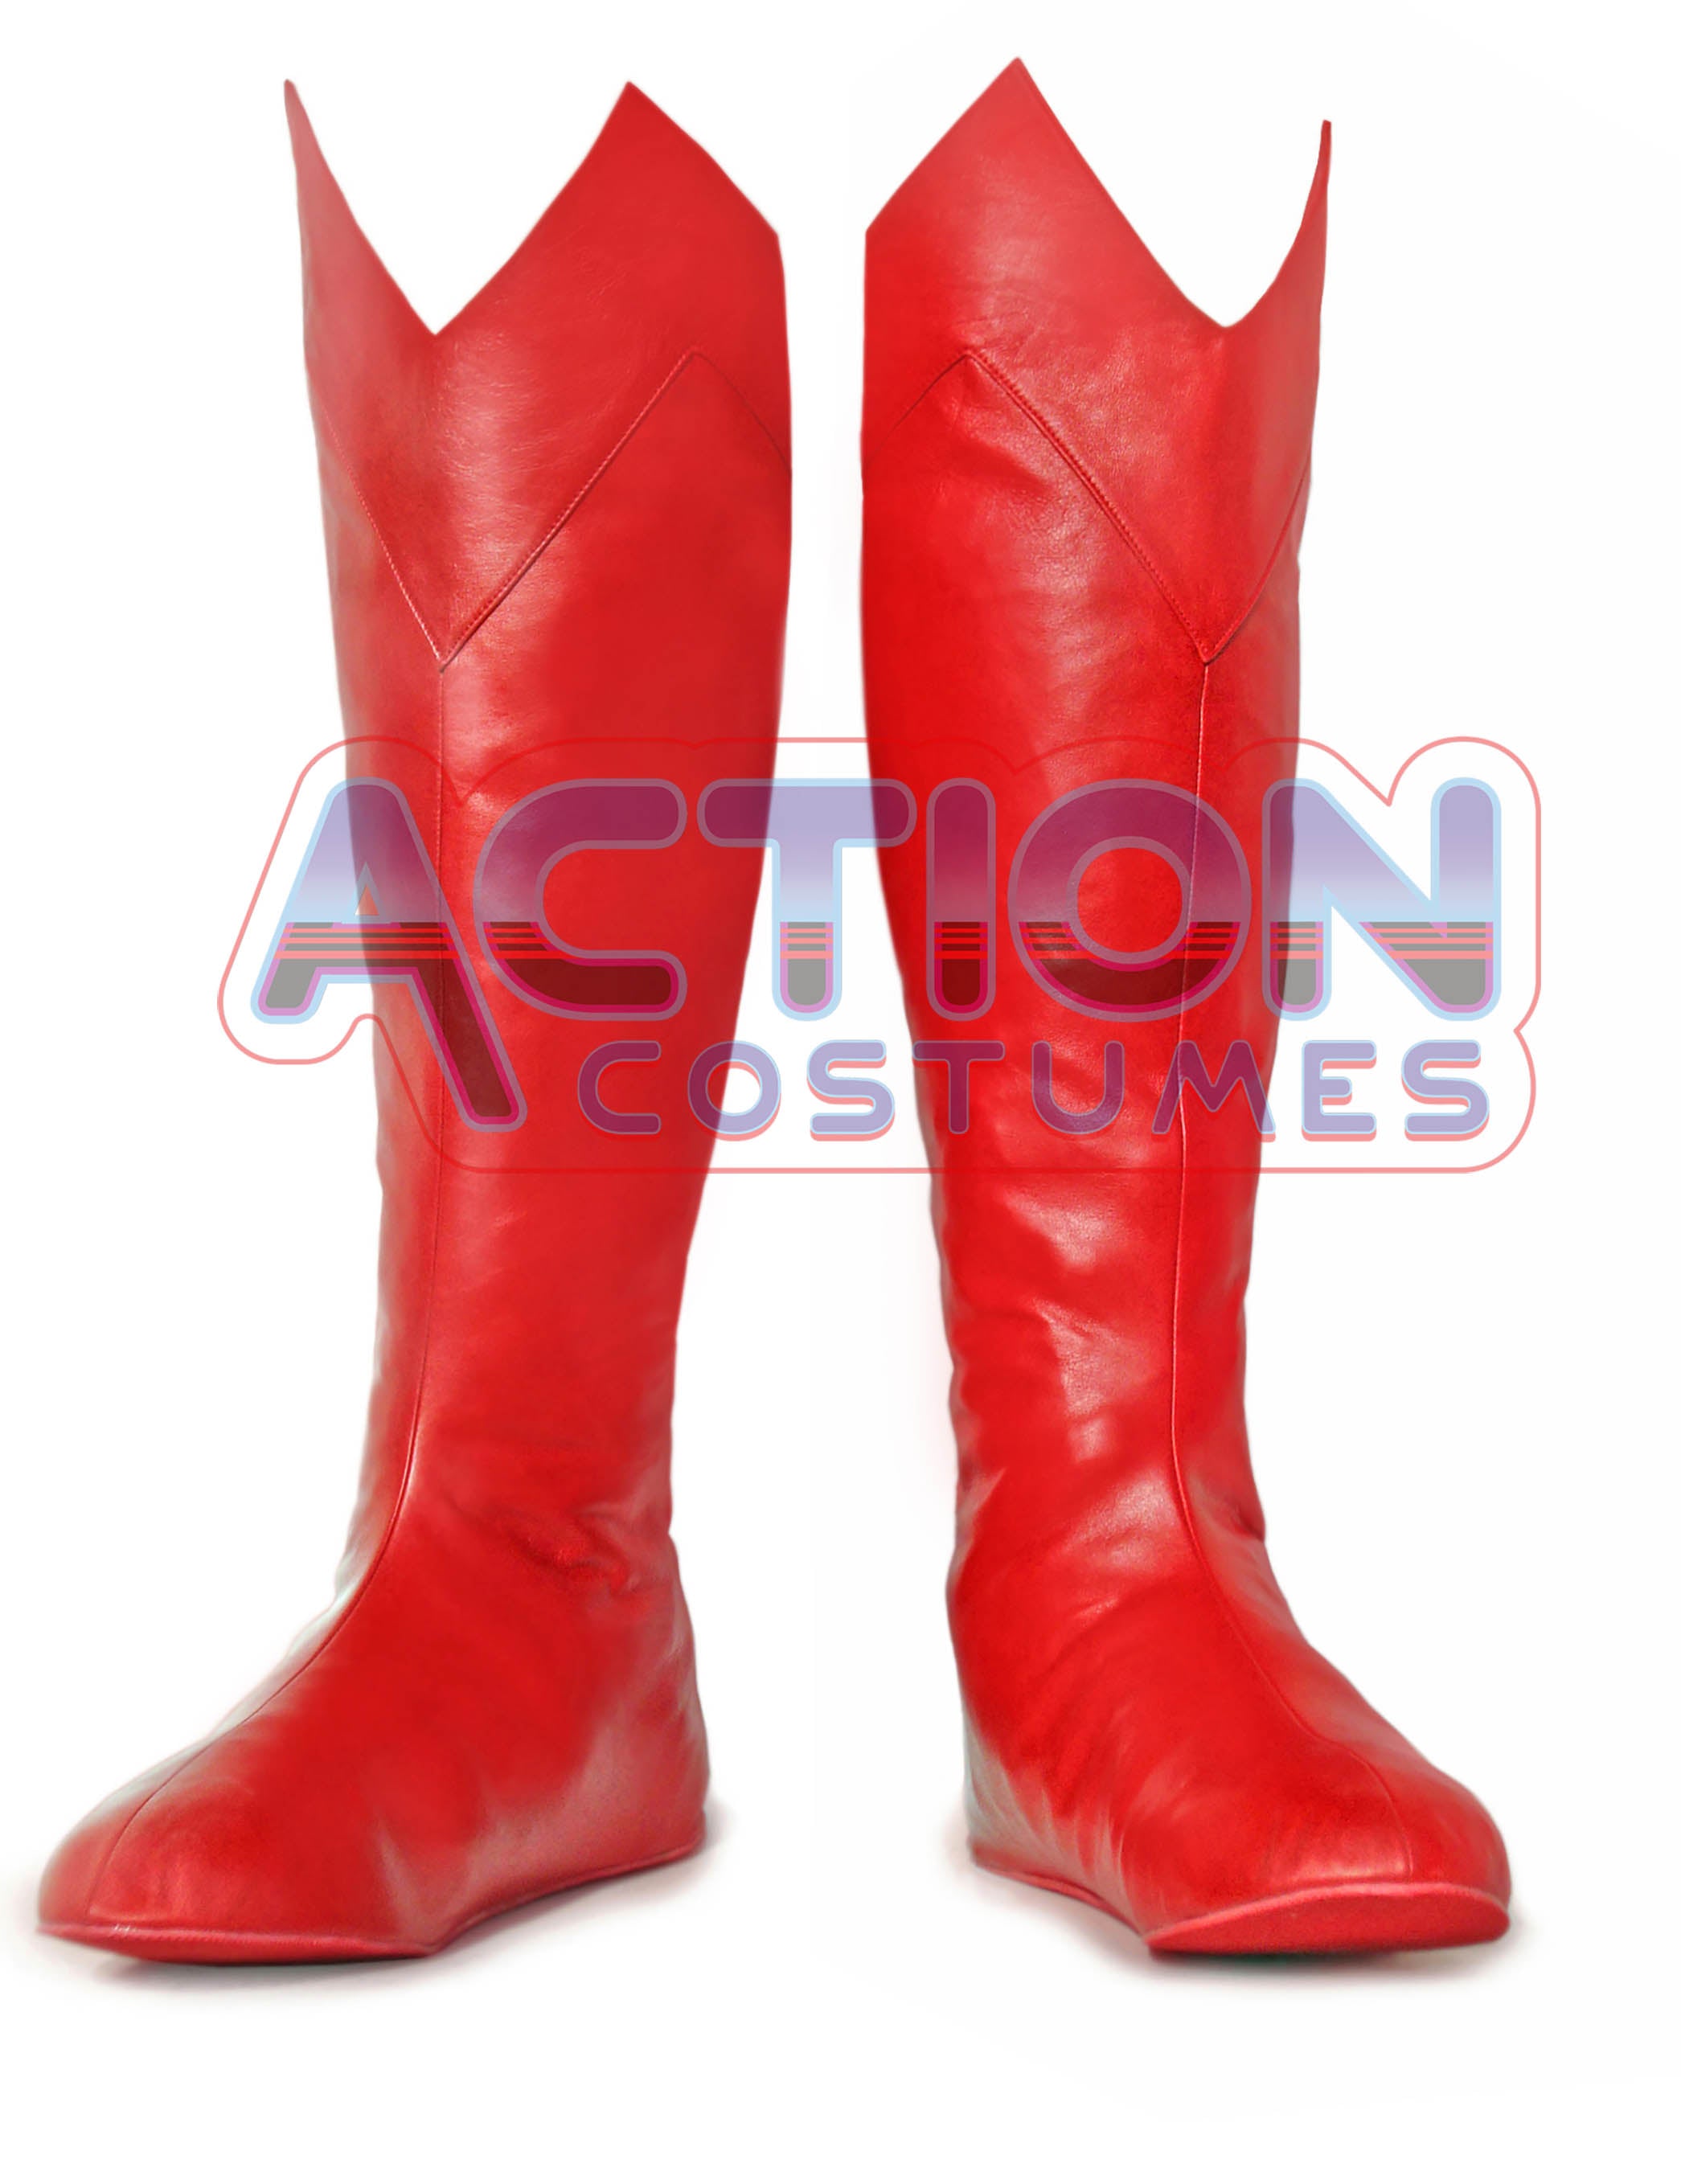 superman-boots-80s-style-christopher-reeve-size-ready-to-ship